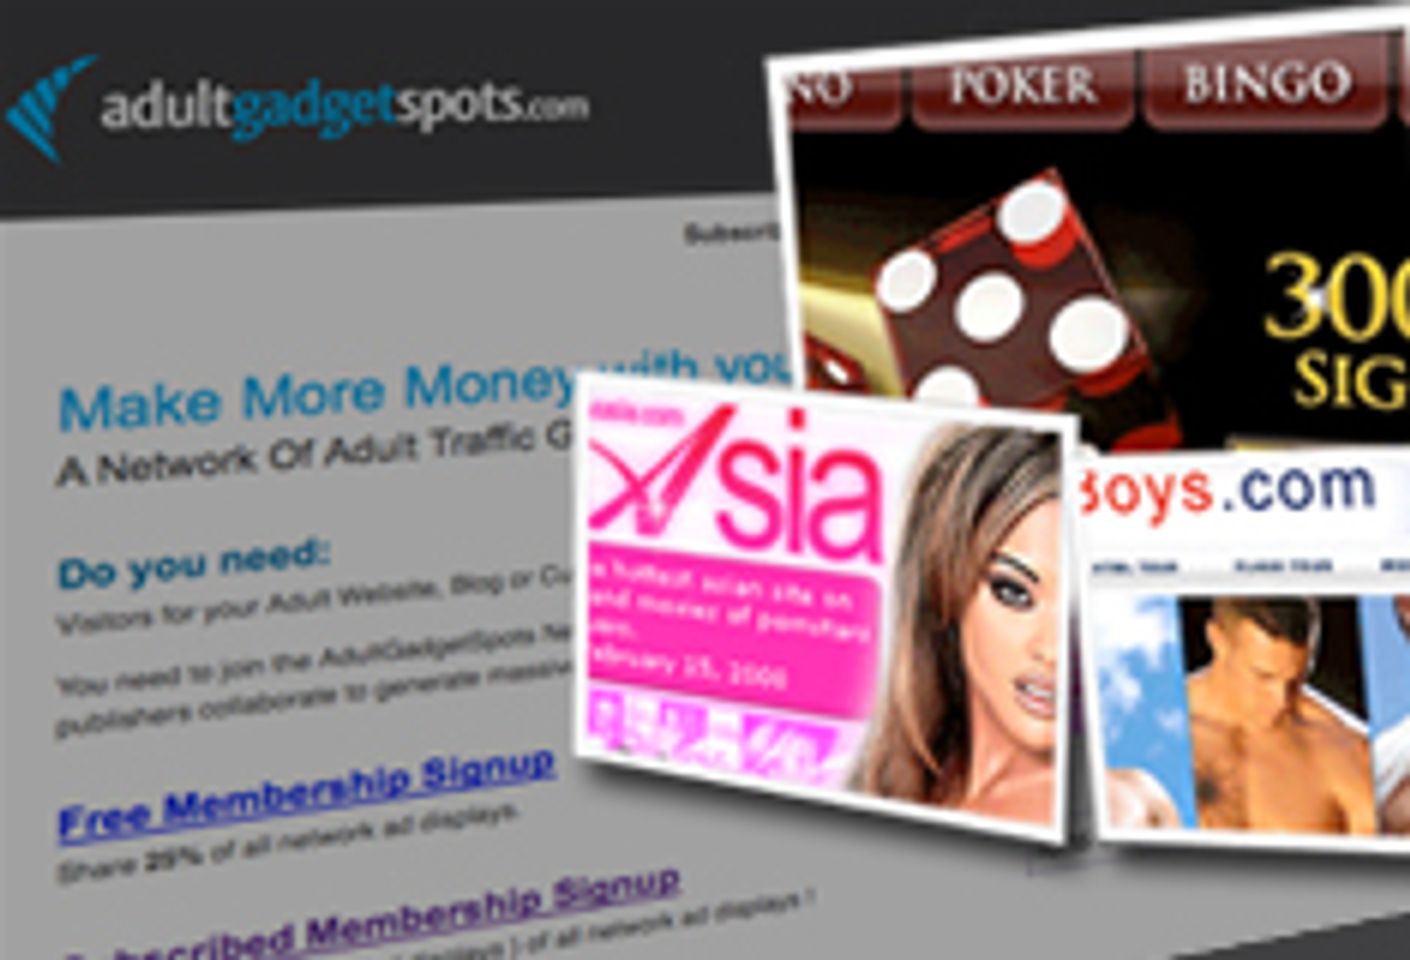 Get Paid to Advertise with AdultGadgetSpots.com